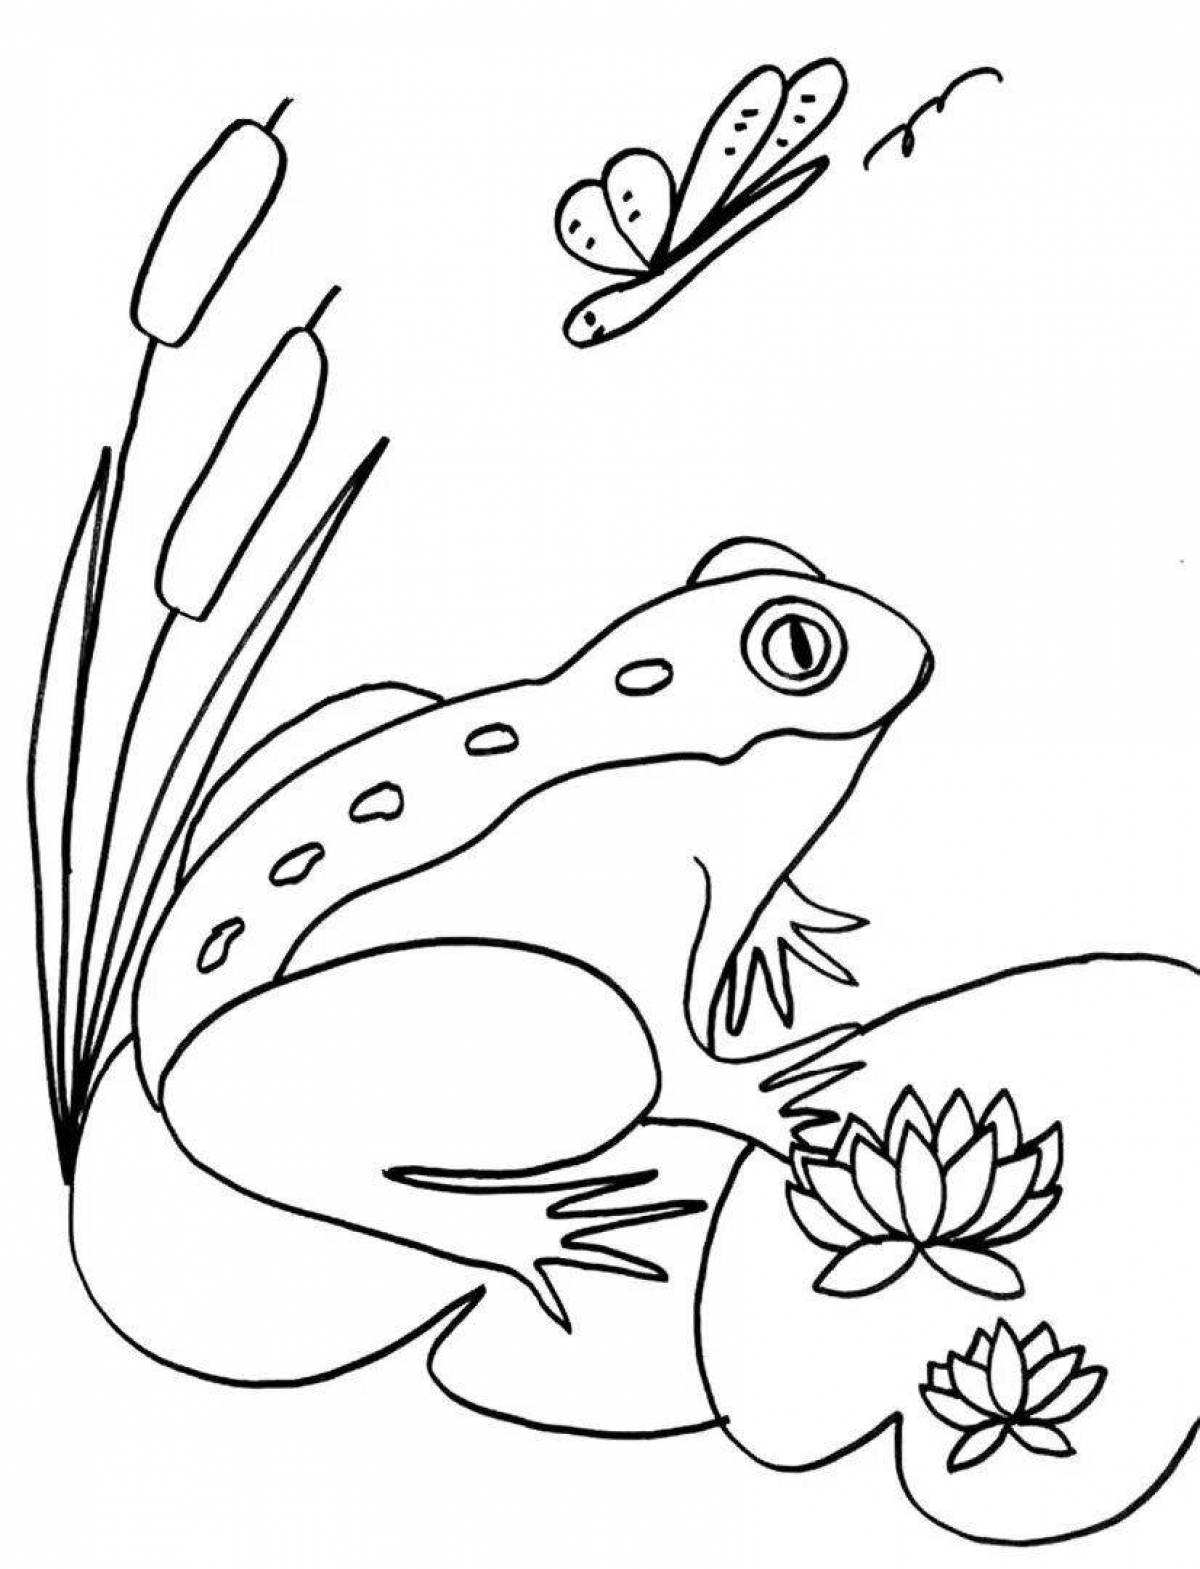 Coloring page gorgeous toad and rose